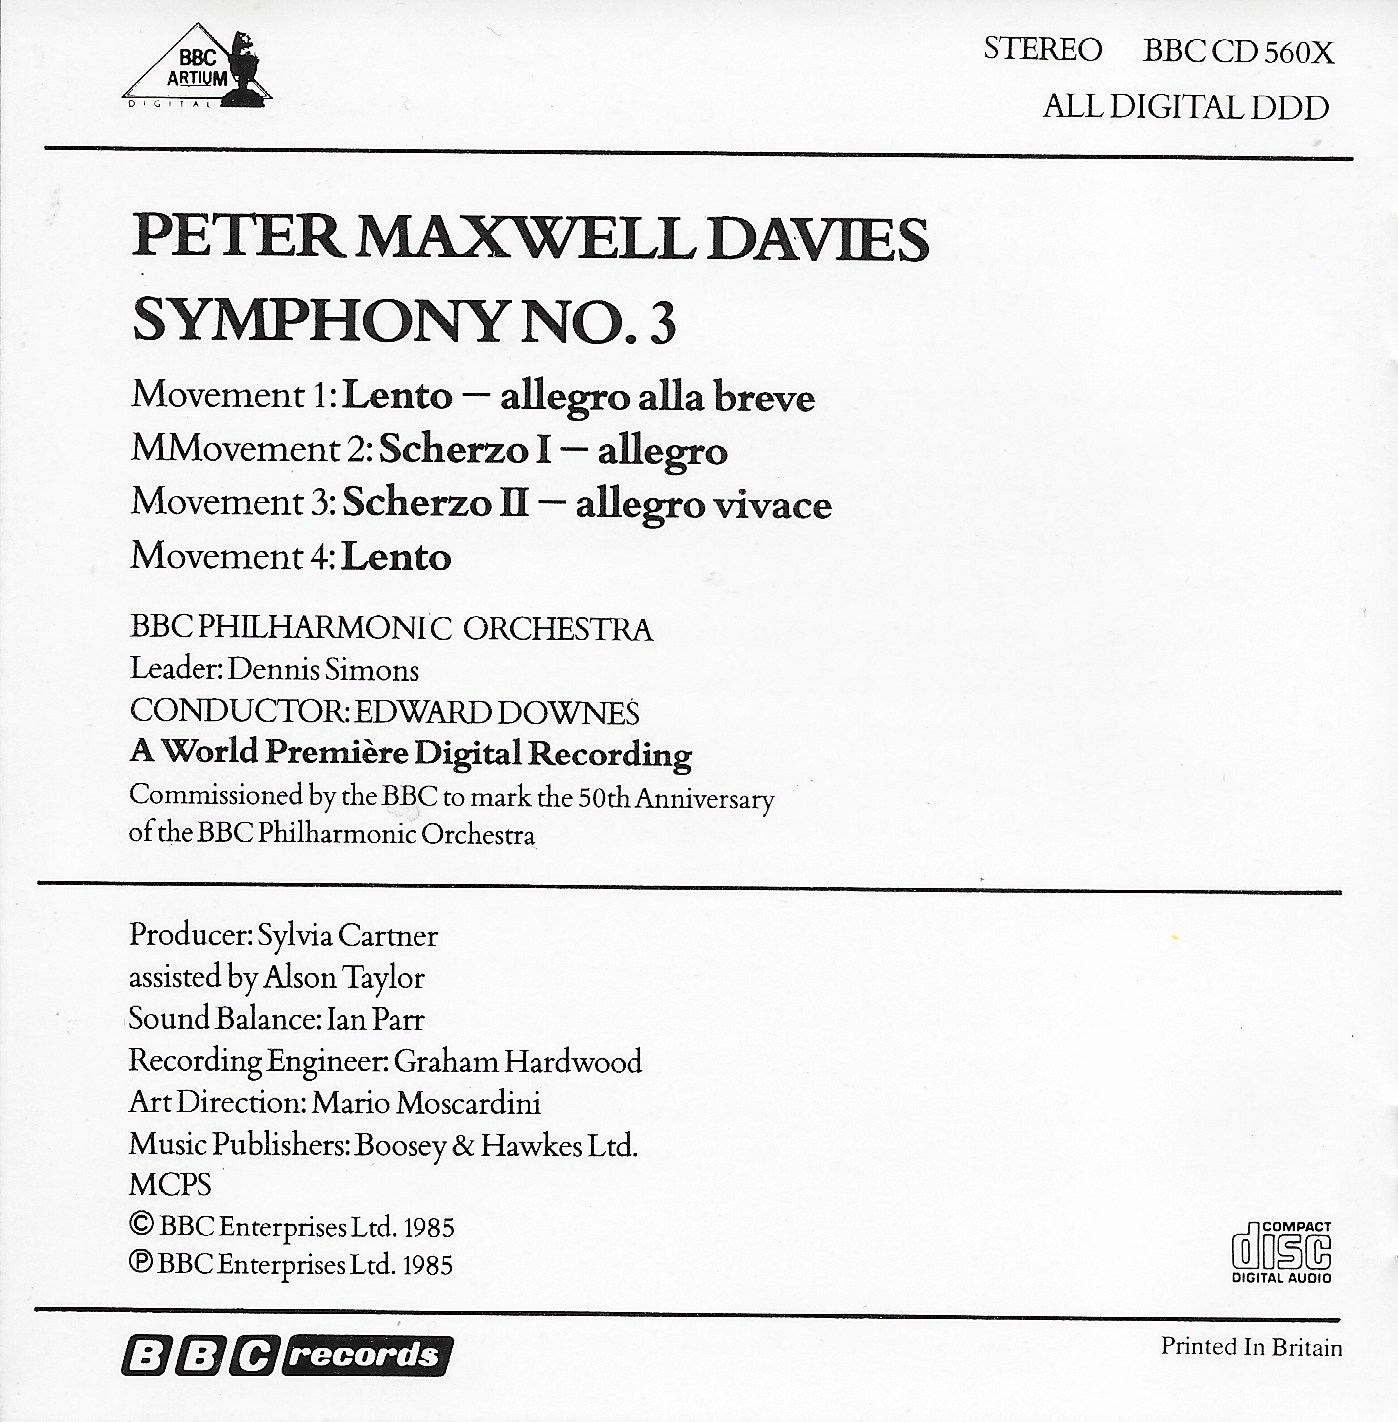 Picture of BBCCD560 X Peter Maxwell Davies - Symphony no. 3 by artist Peter Maxwell Davies from the BBC records and Tapes library